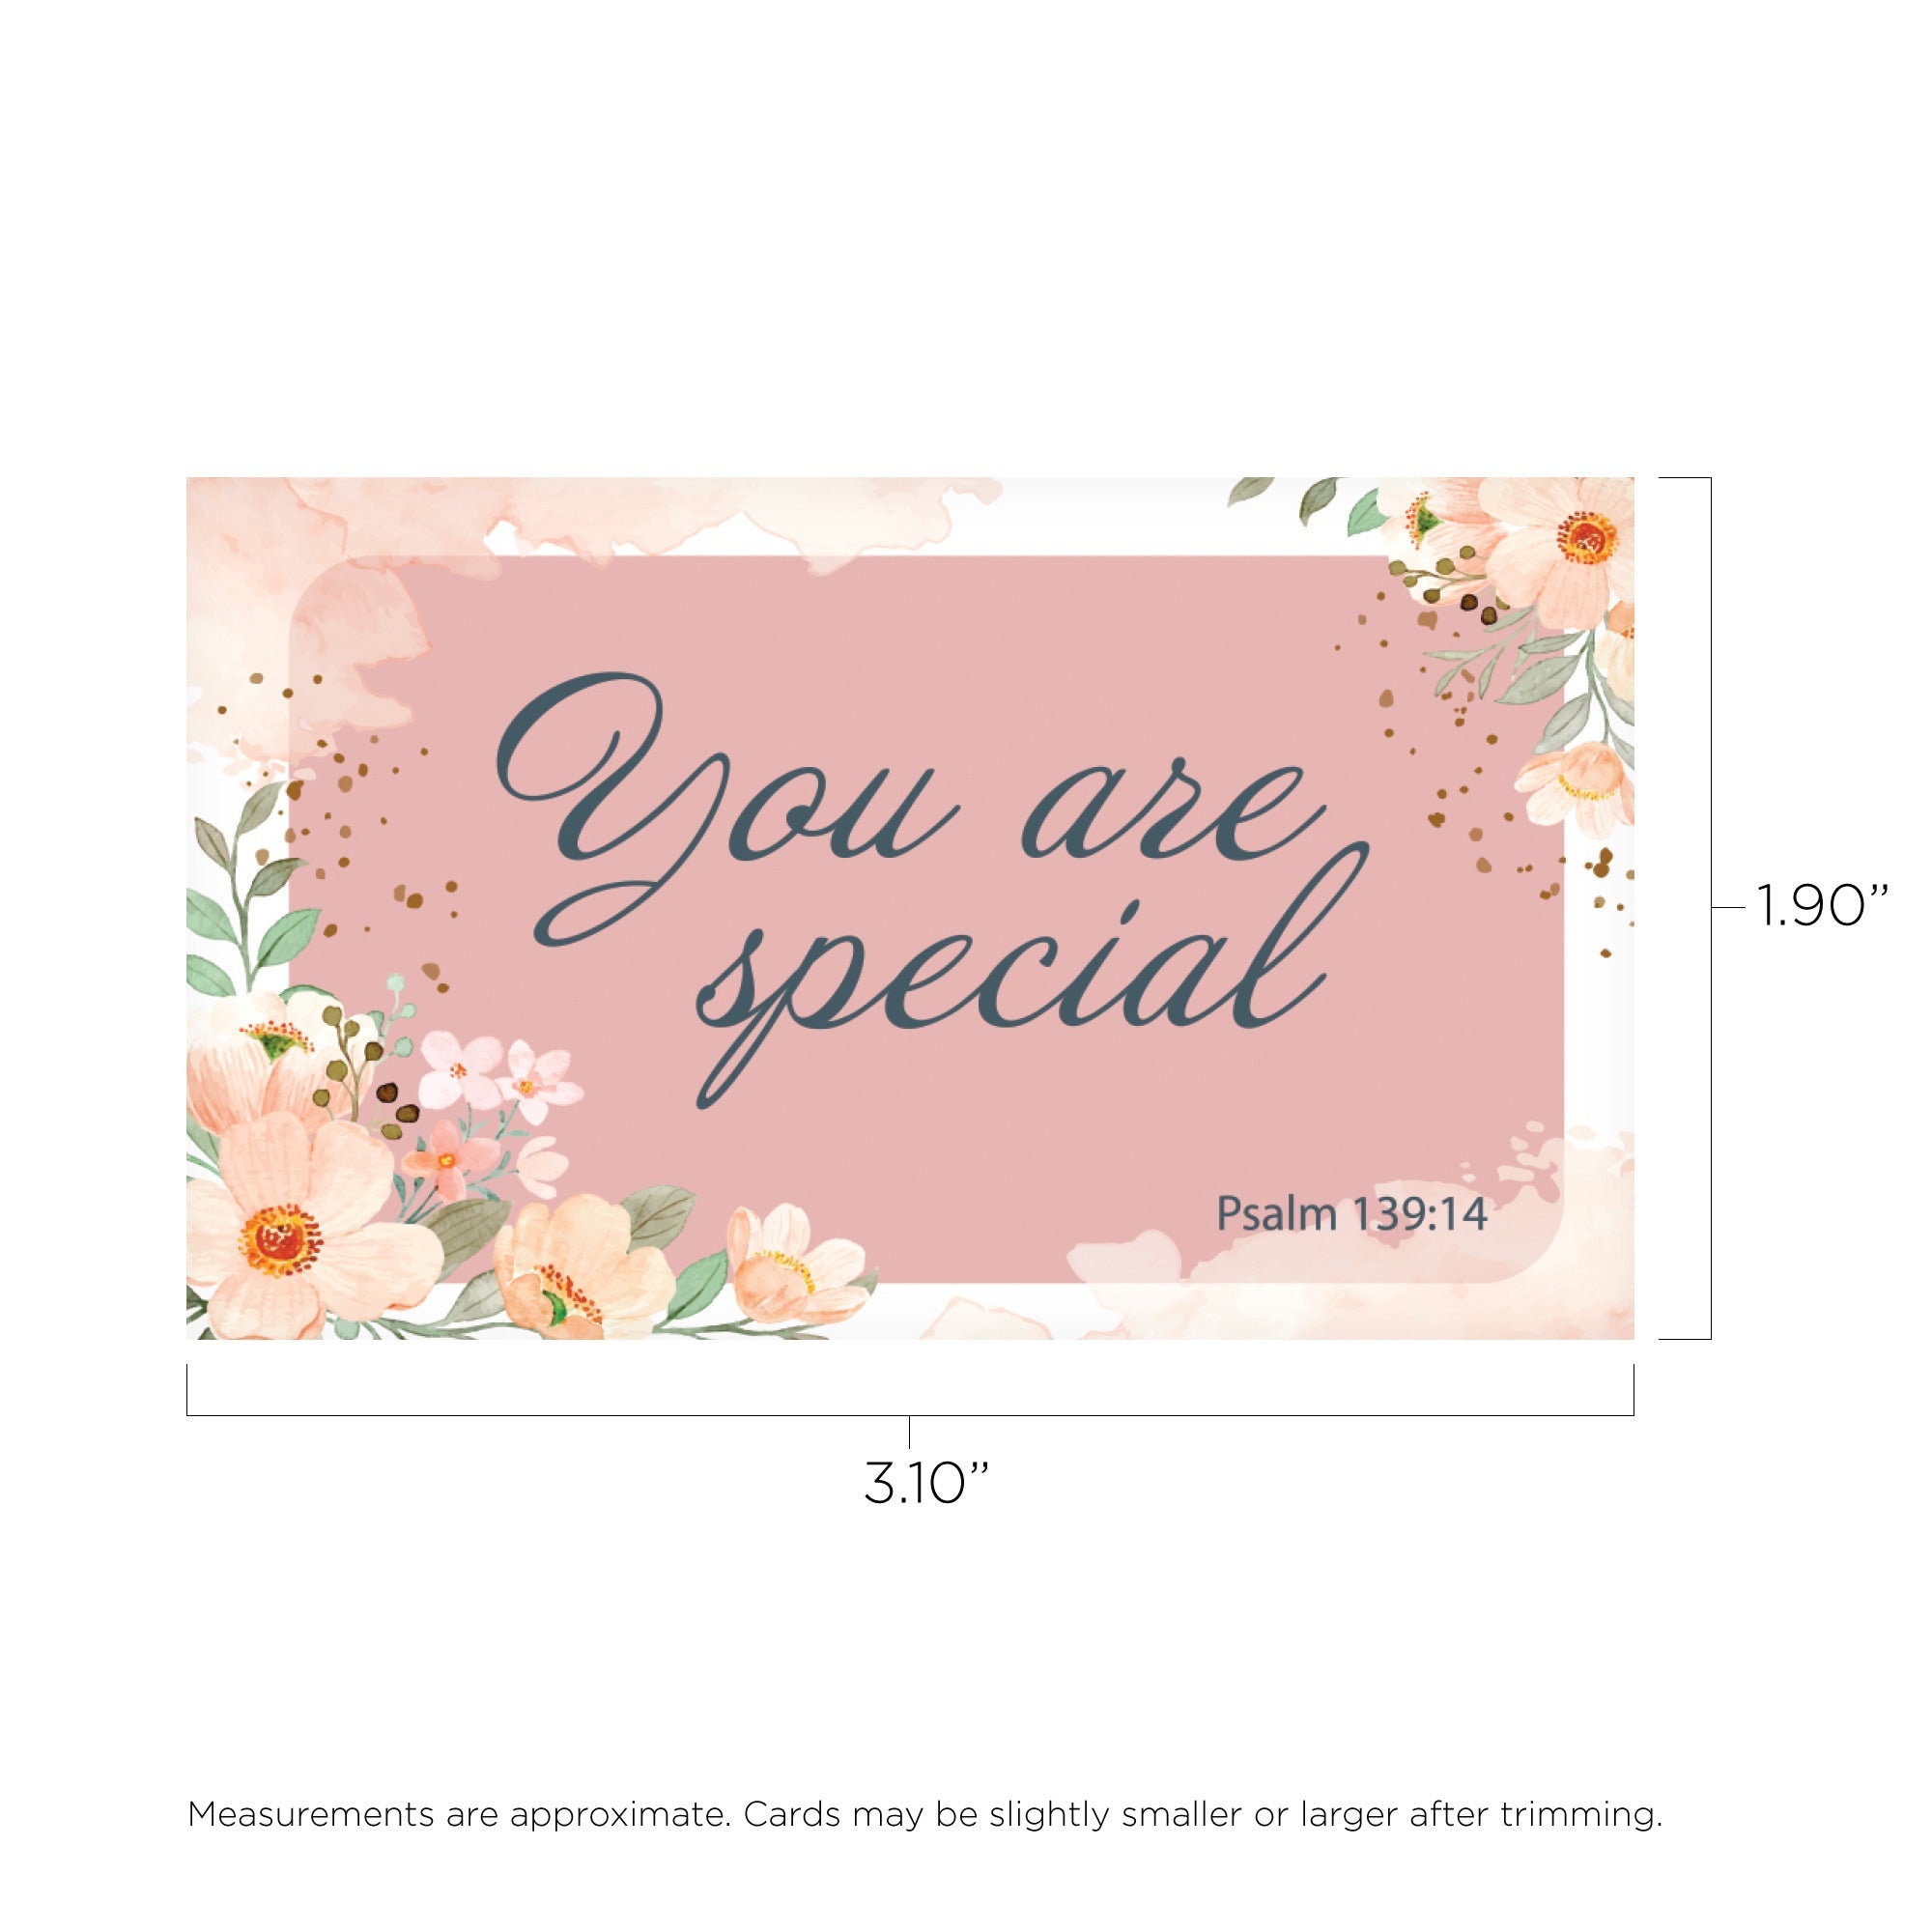 You are special, Psalm 139:14, Pass Along Scripture Cards, Pack of 25